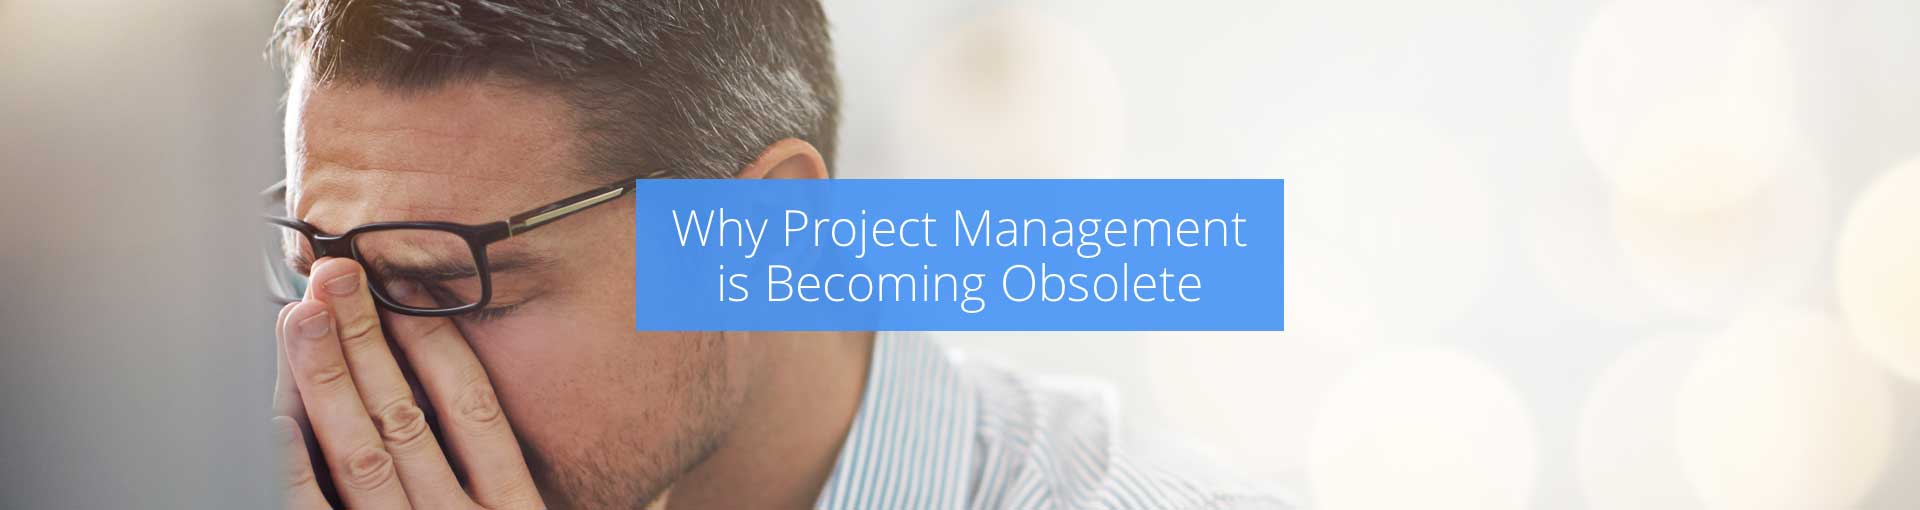 Why Project Management is Becoming Obsolete Featured Image